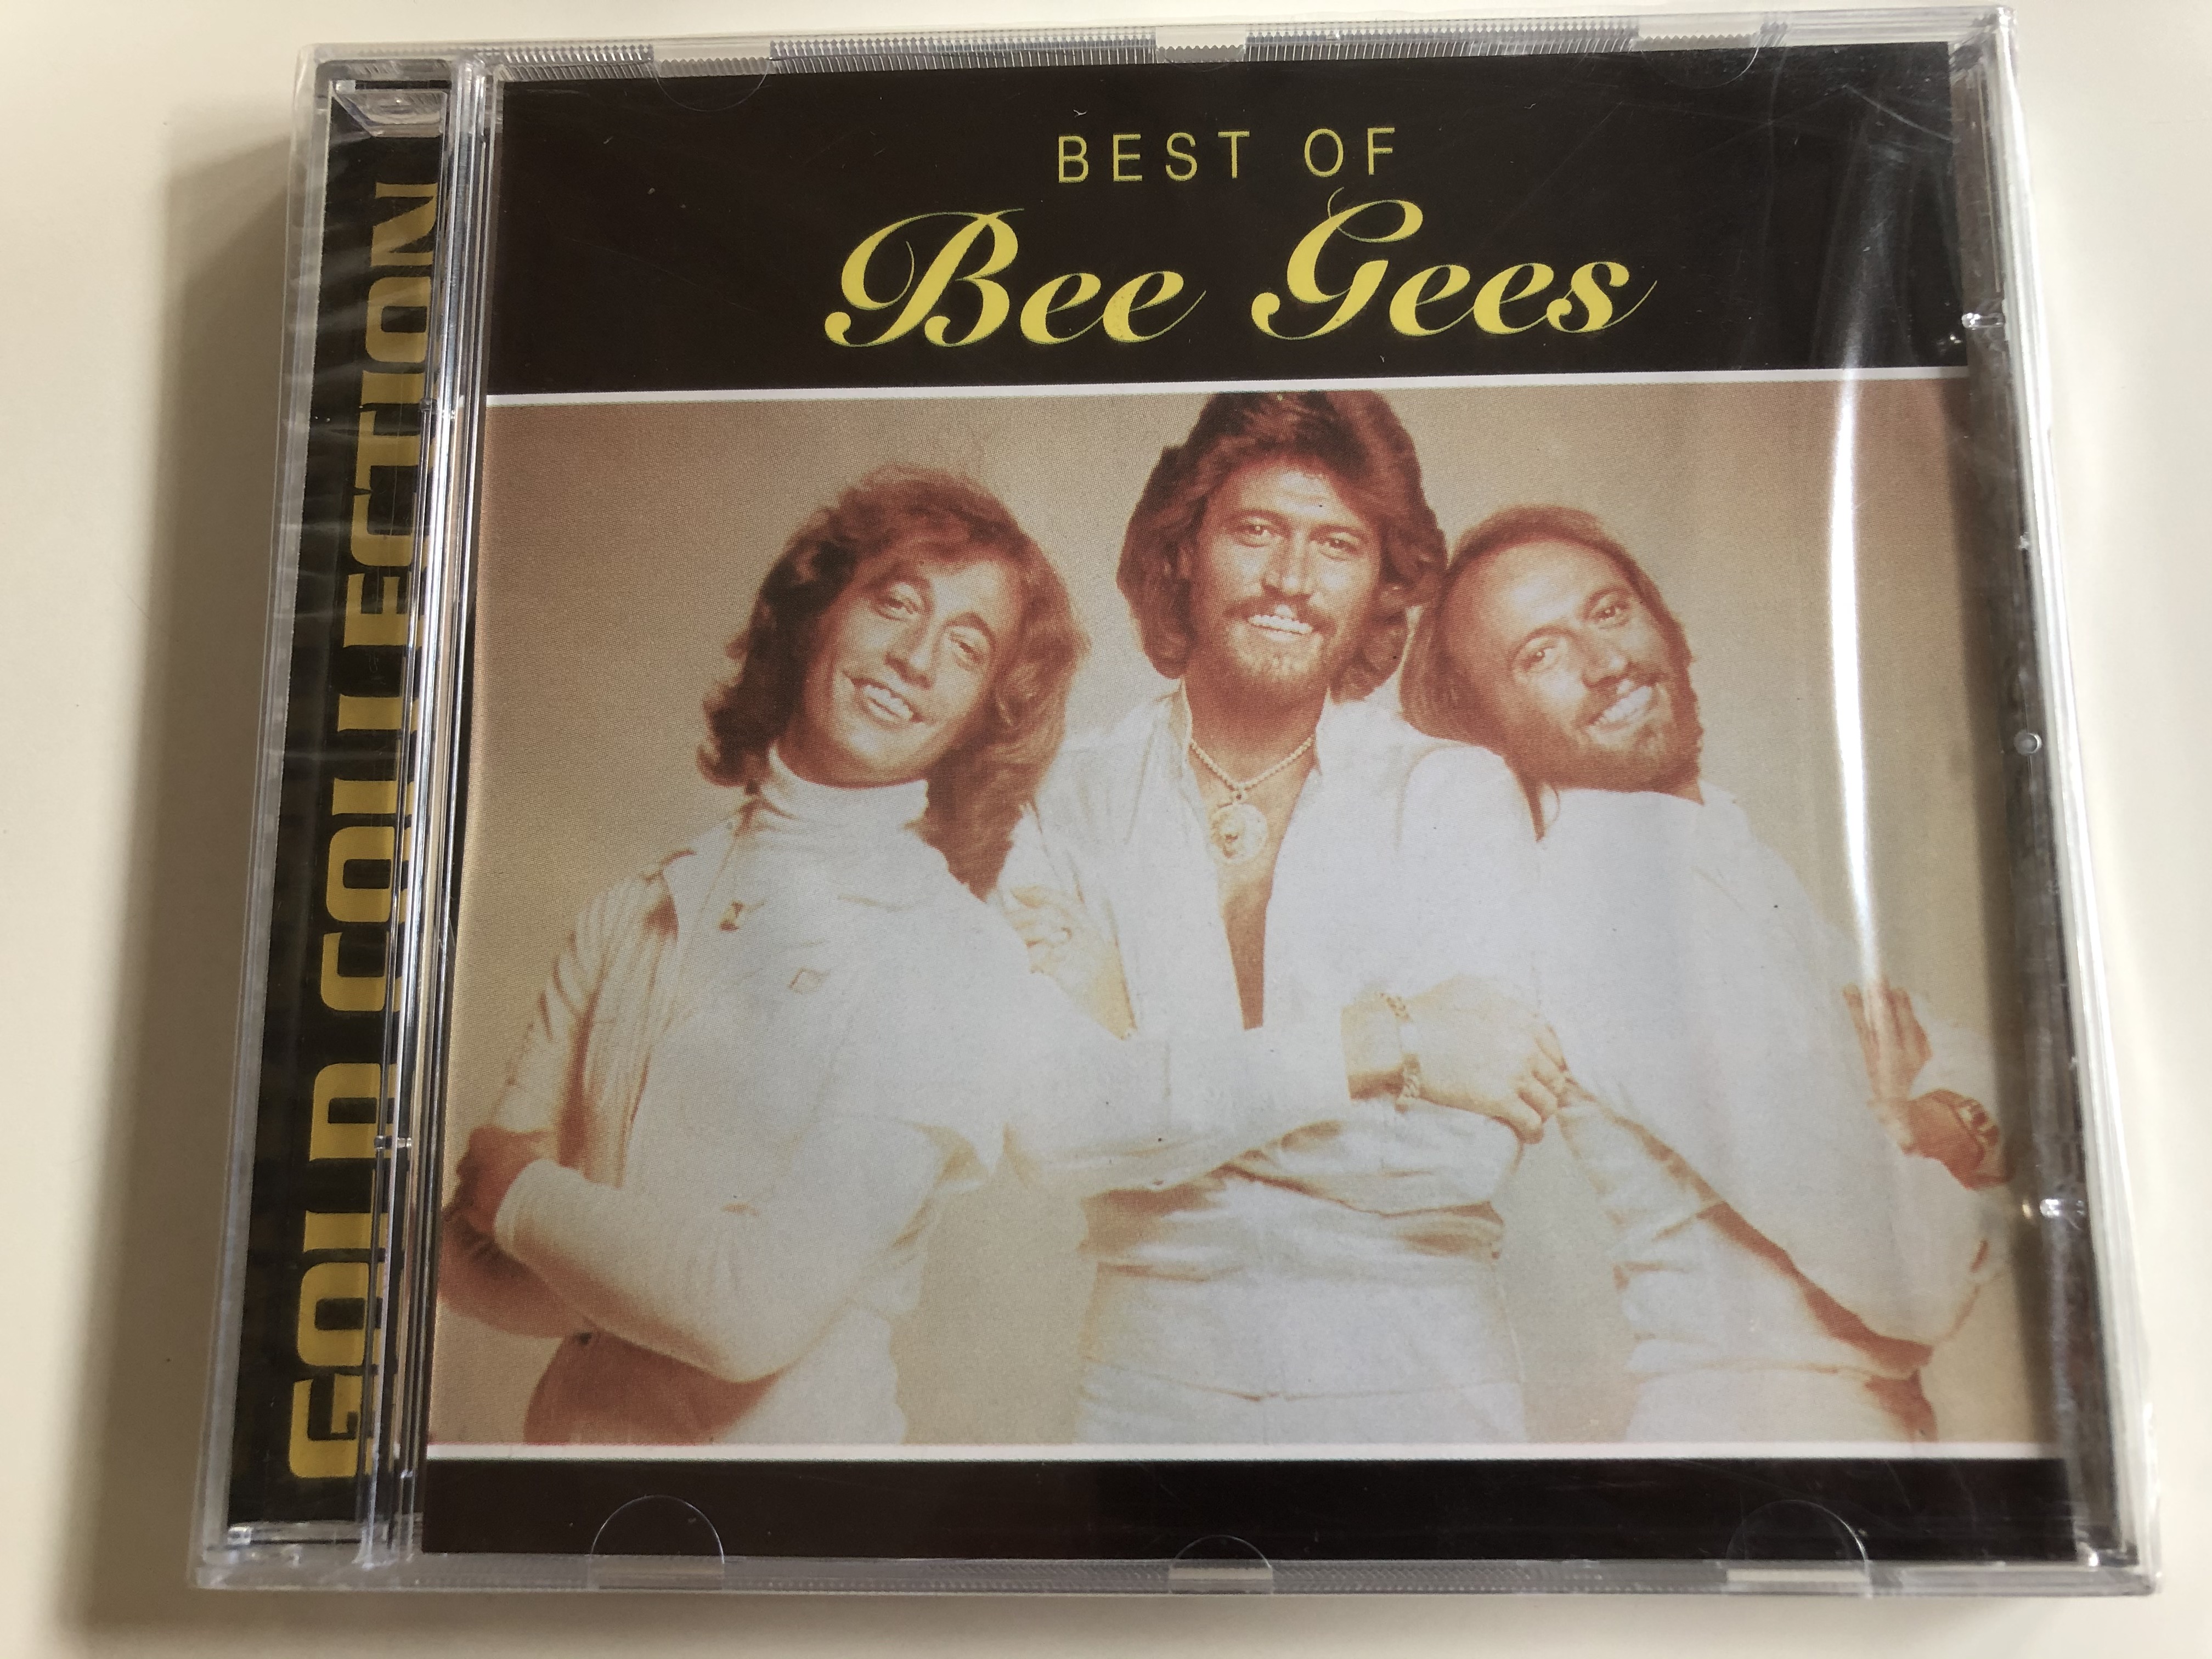 best-of-bee-gees-gold-collection-poliprint-kiad-audio-cd-ppcd-113-1-.jpg